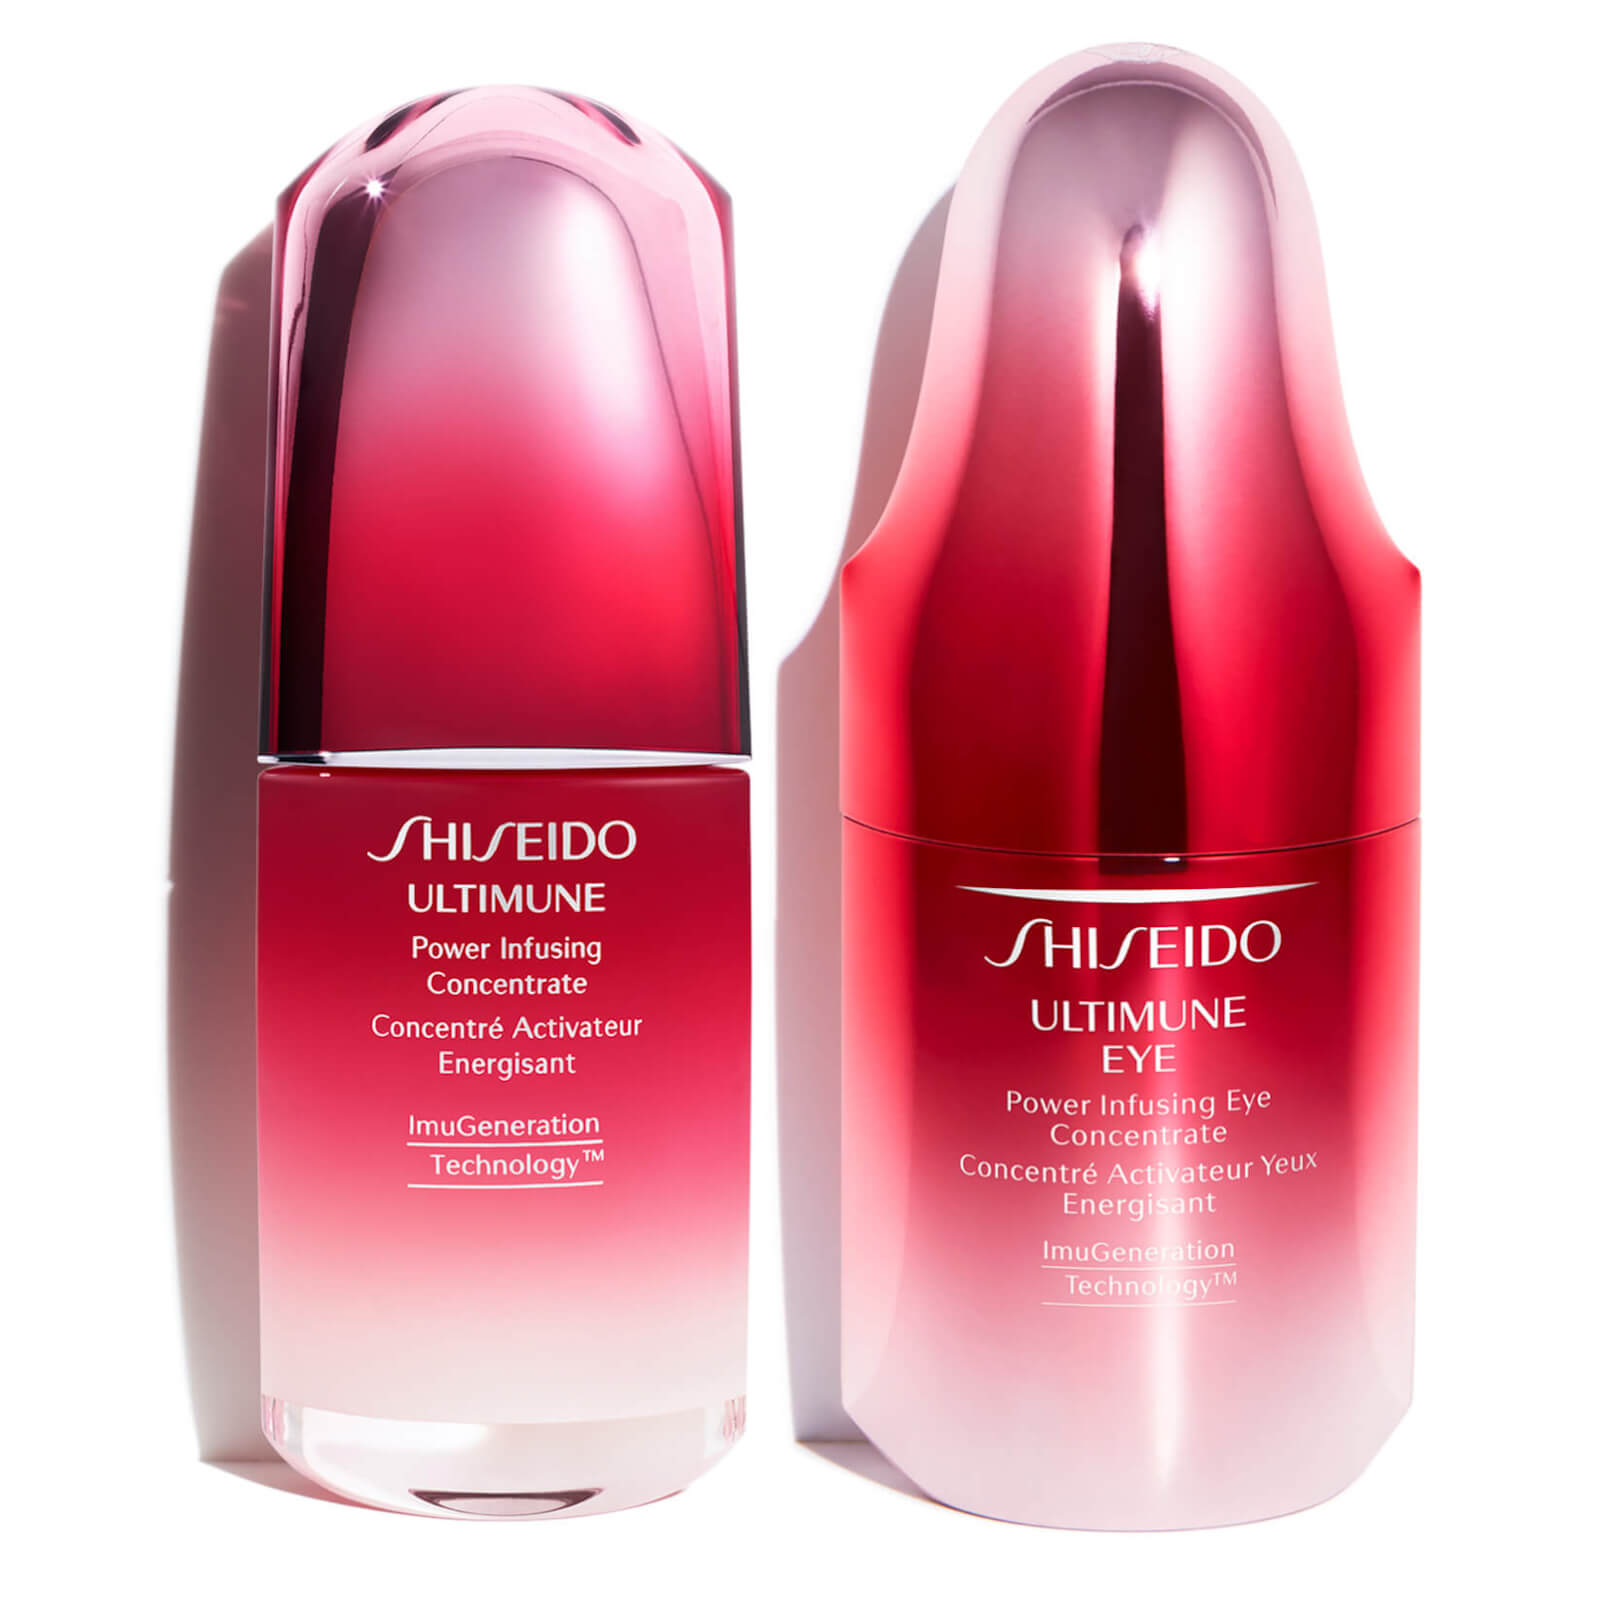 Shiseido concentrate. Ultimune концентрат шисейдо. Ultimune концентрат шисейдо Power infusing. Shiseido Ultimune Eye Power infusing Eye Concentrate. Shiseido Ultimate Power infusing.